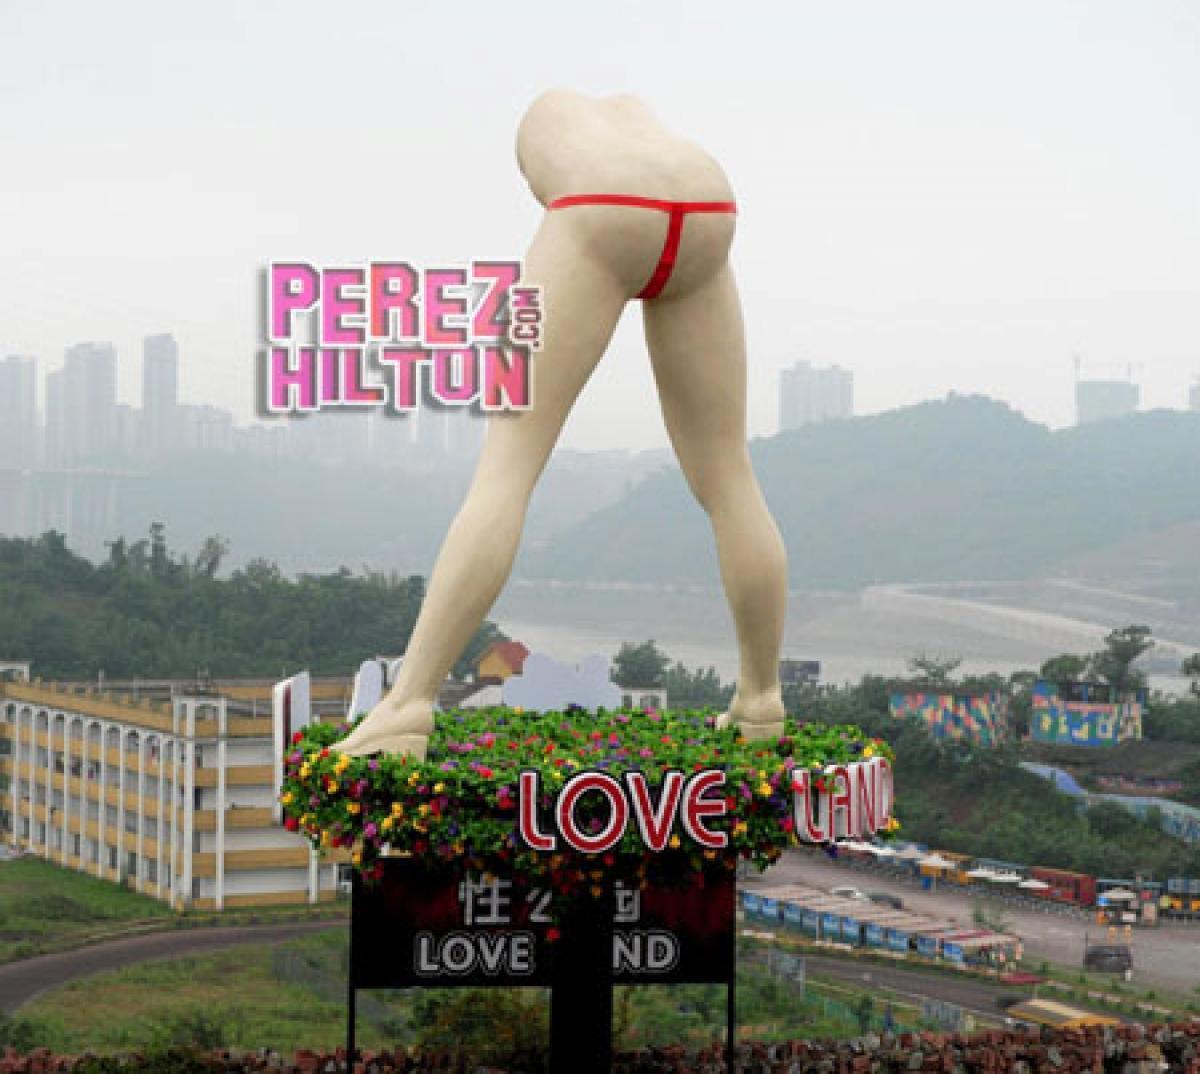 Love and porn in Chongqing